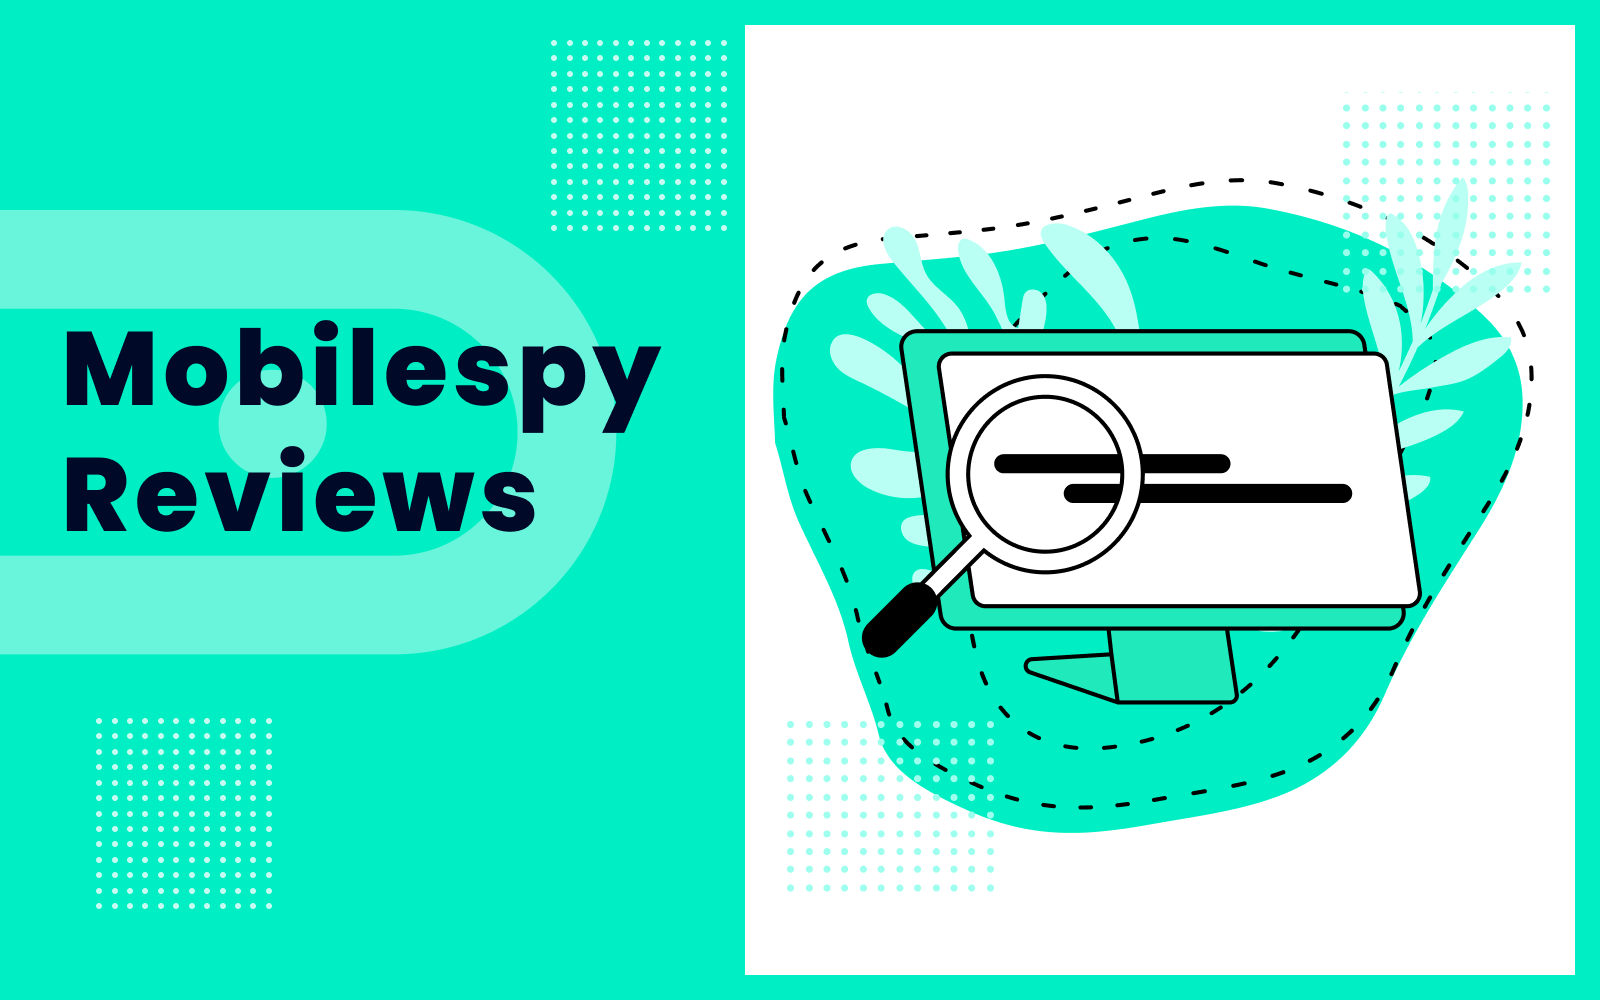 MobileSpy Reviews 2023: Features, Pros, Cons, and More